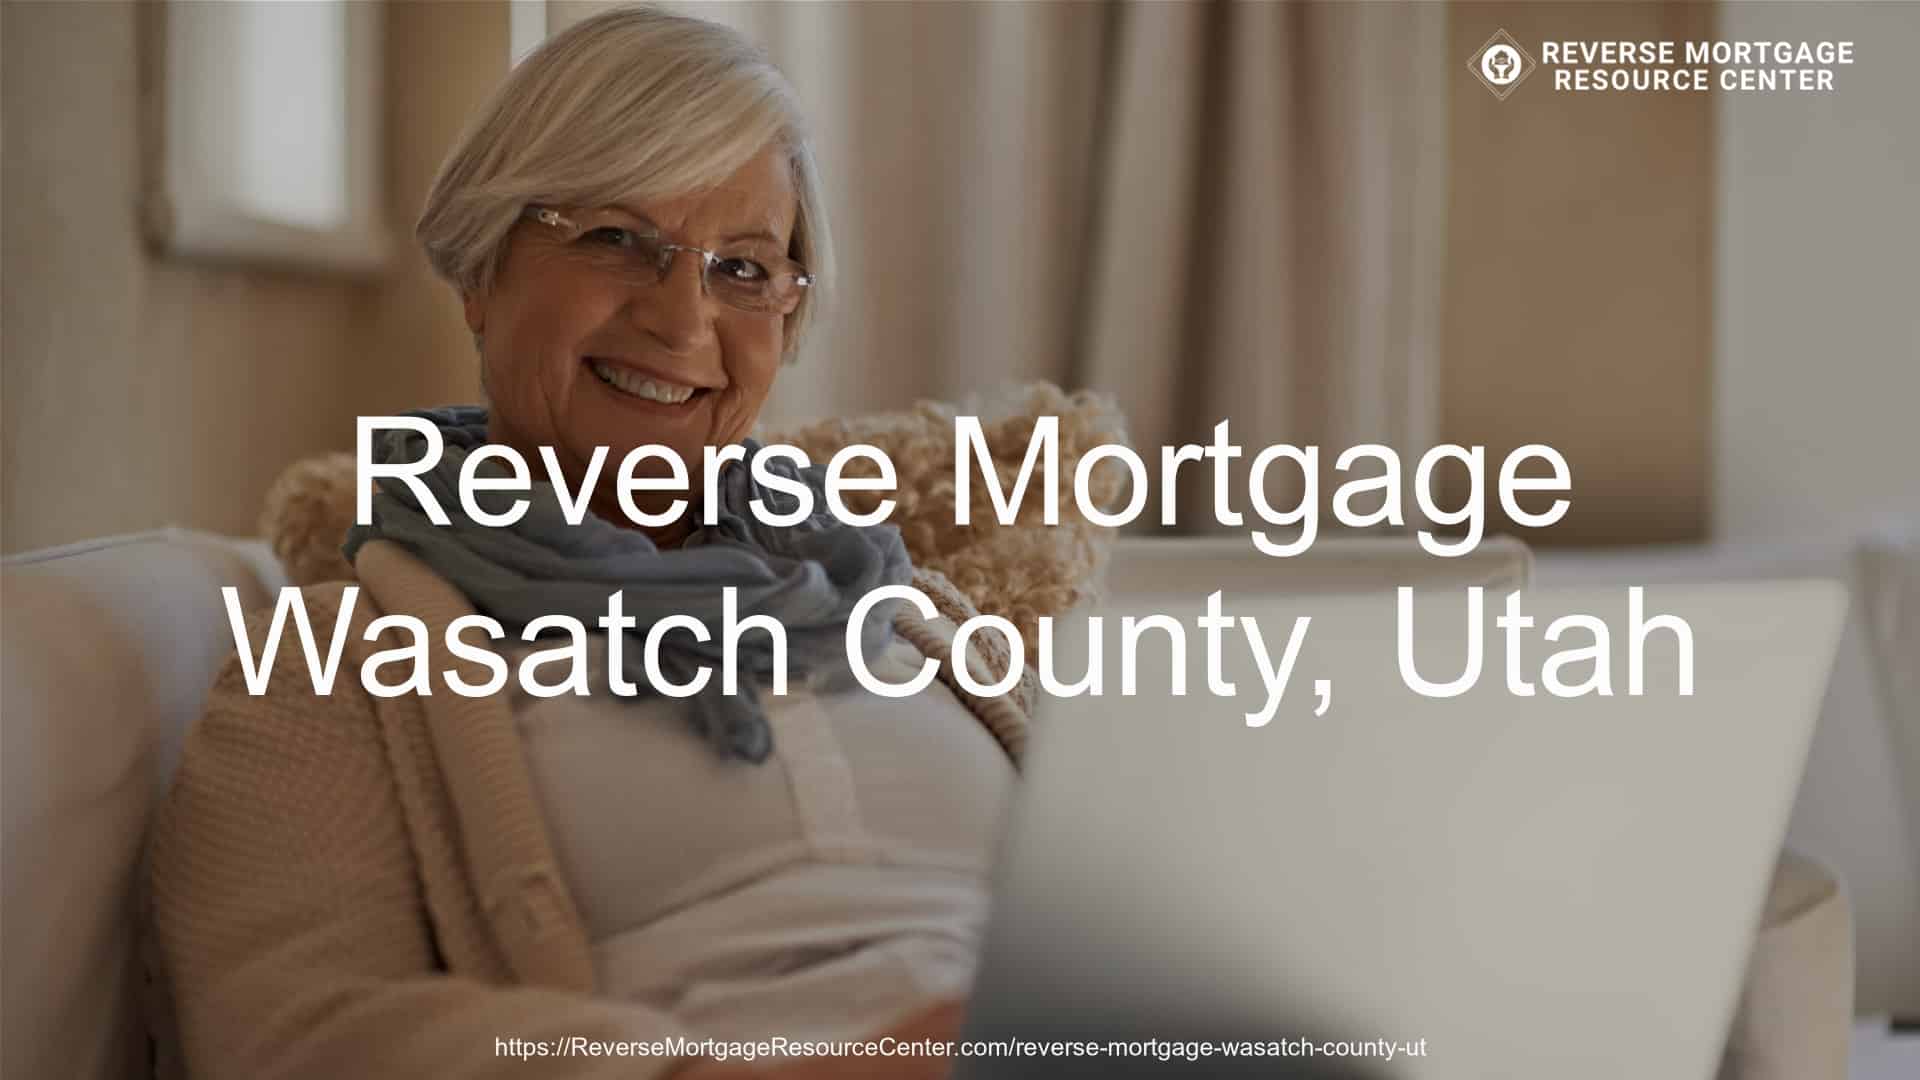 Reverse Mortgage Loans in Wasatch County Utah